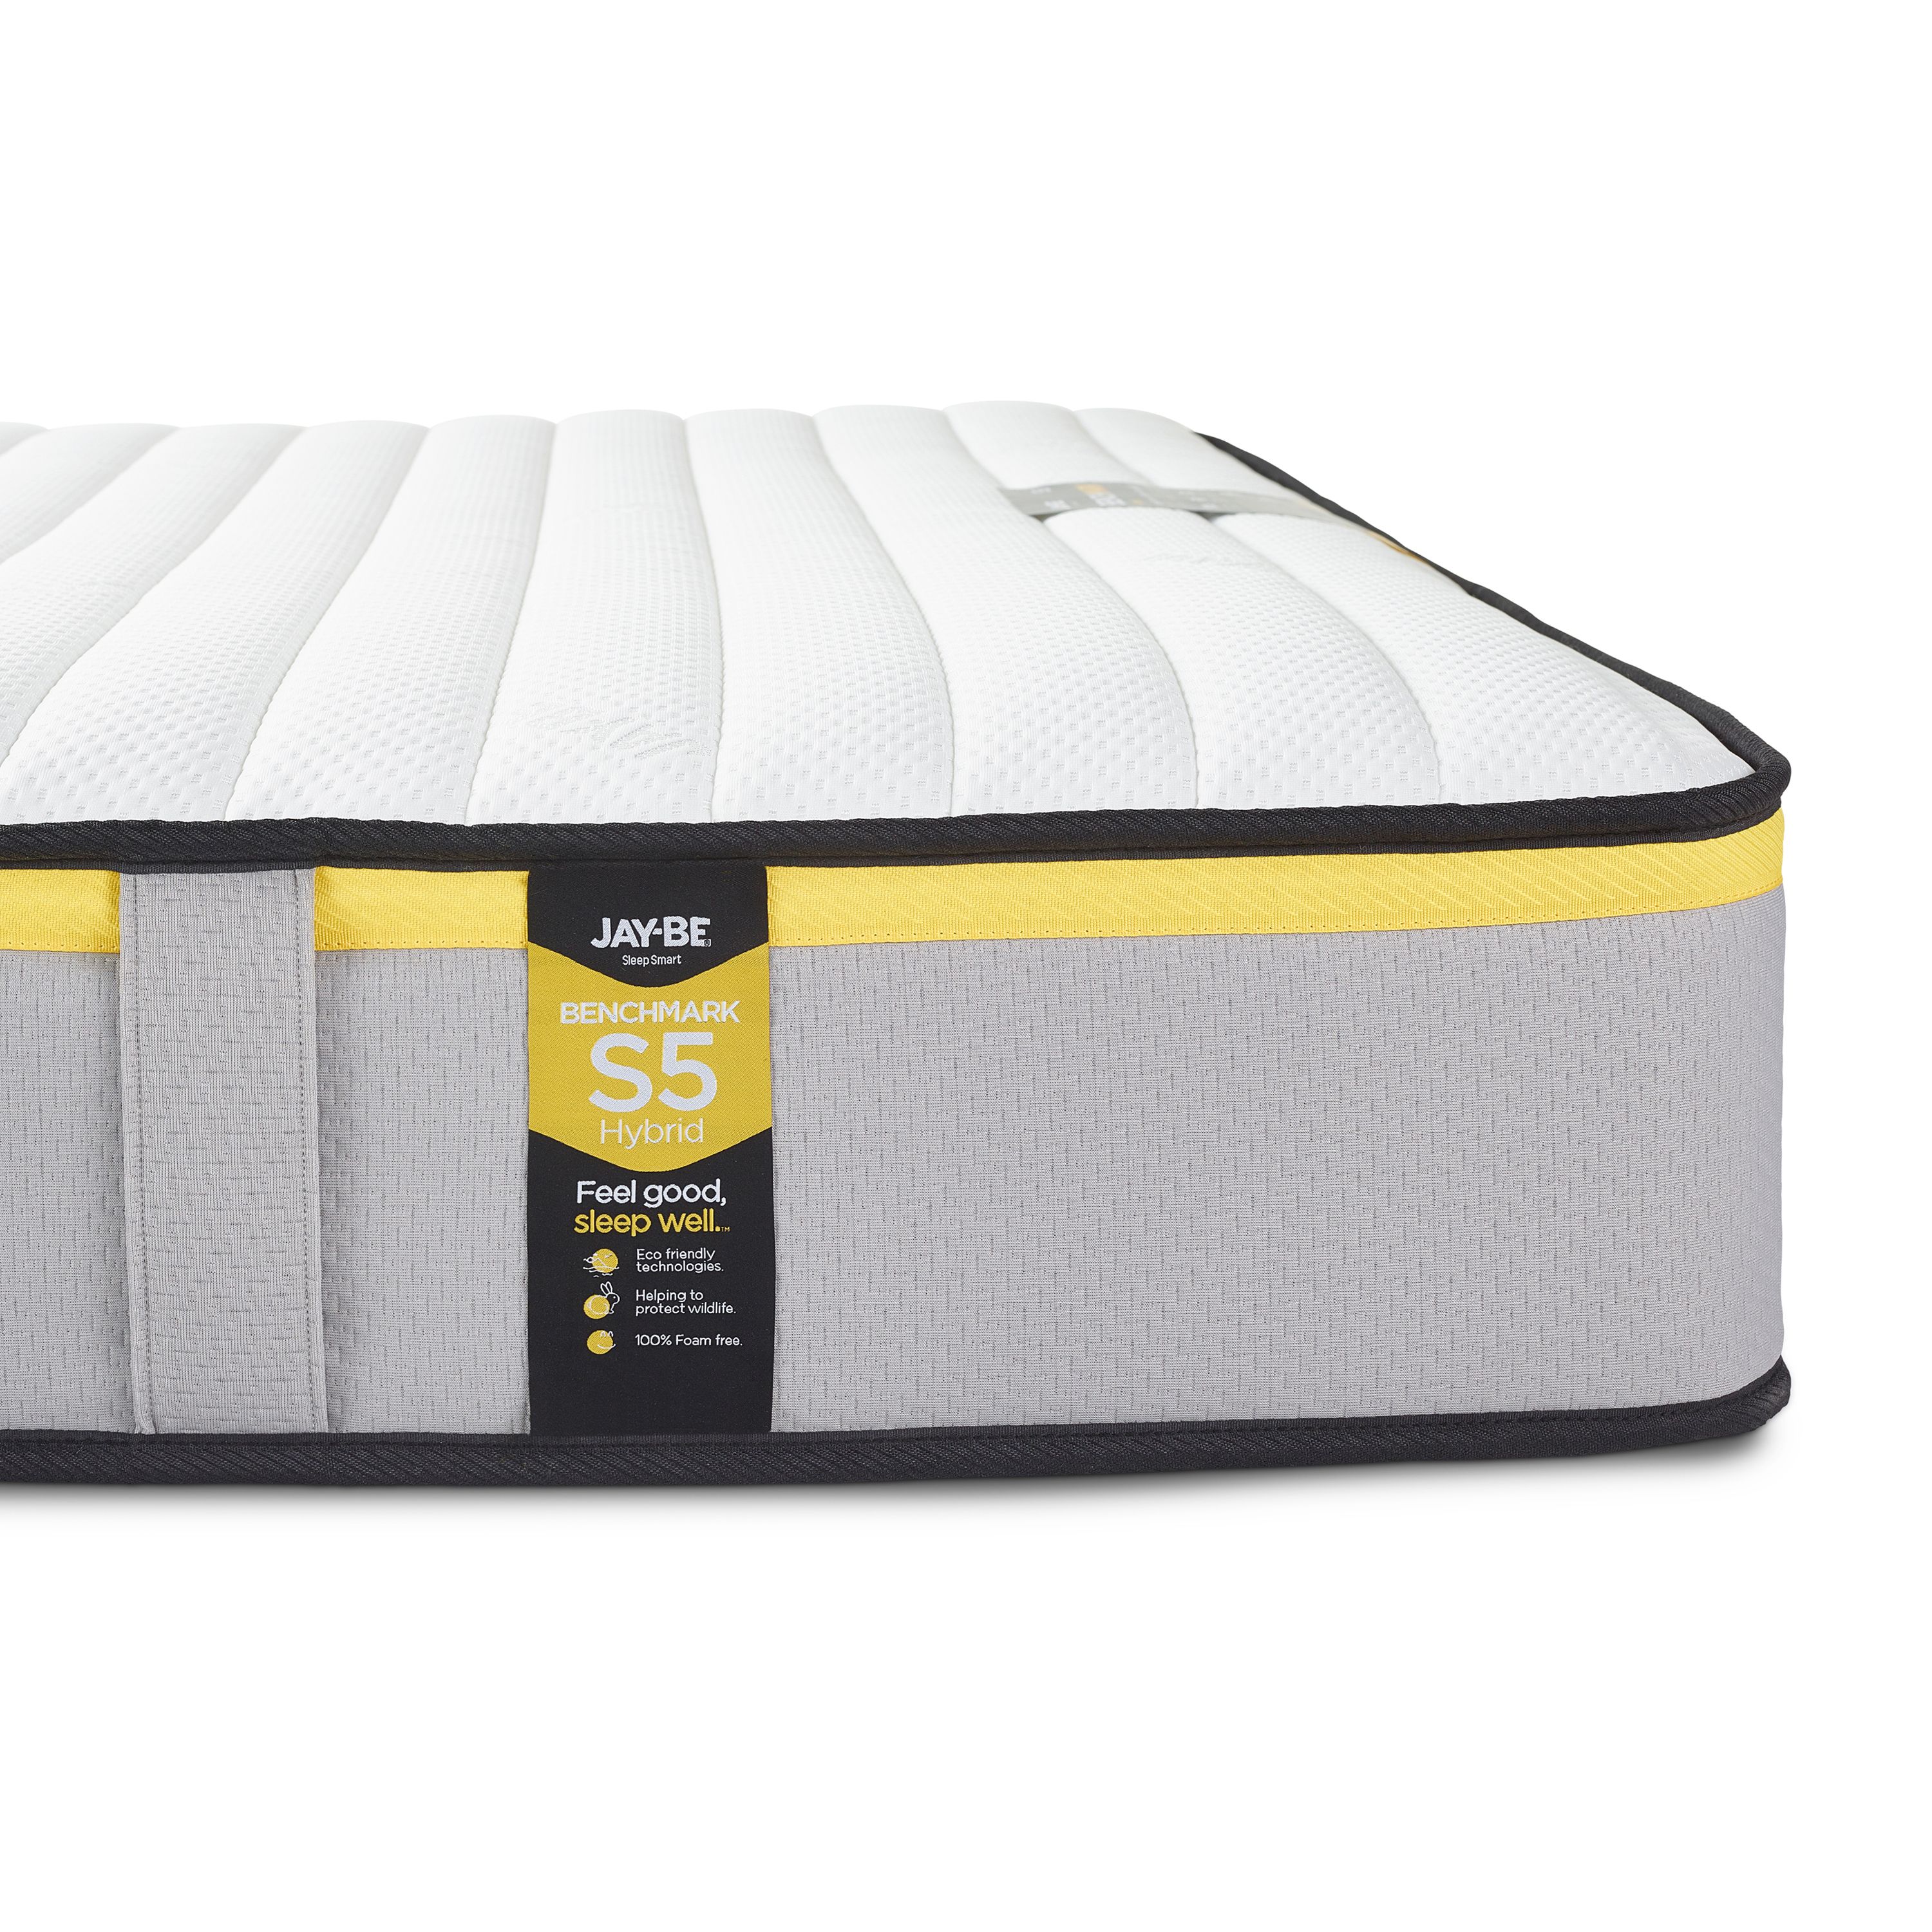 Jay-Be Benchmark S5 Hybrid Eco Friendly Open coil Water resistant King Mattress